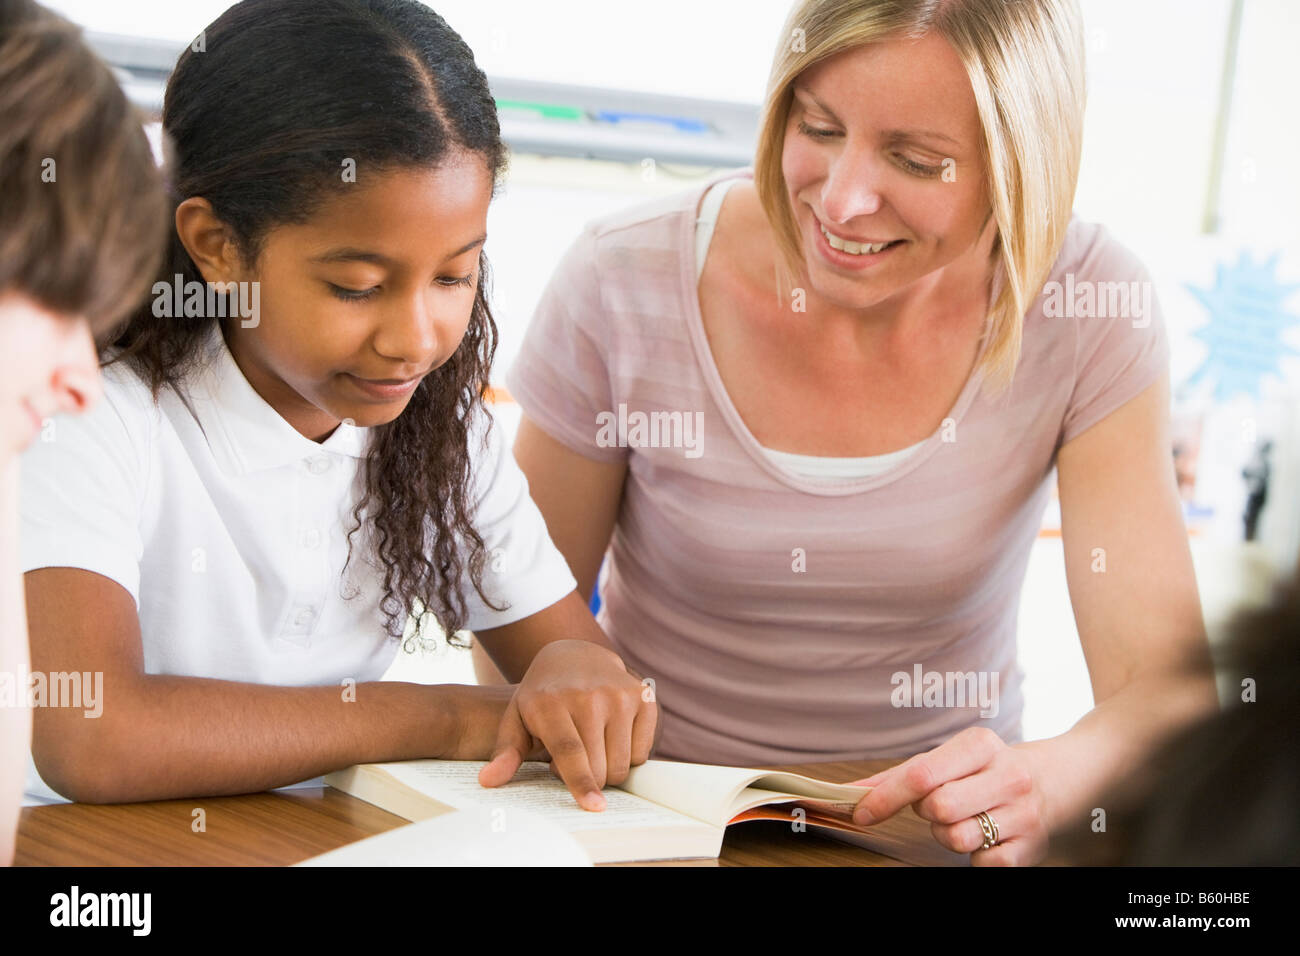 Student in class reading book with teacher Stock Photo